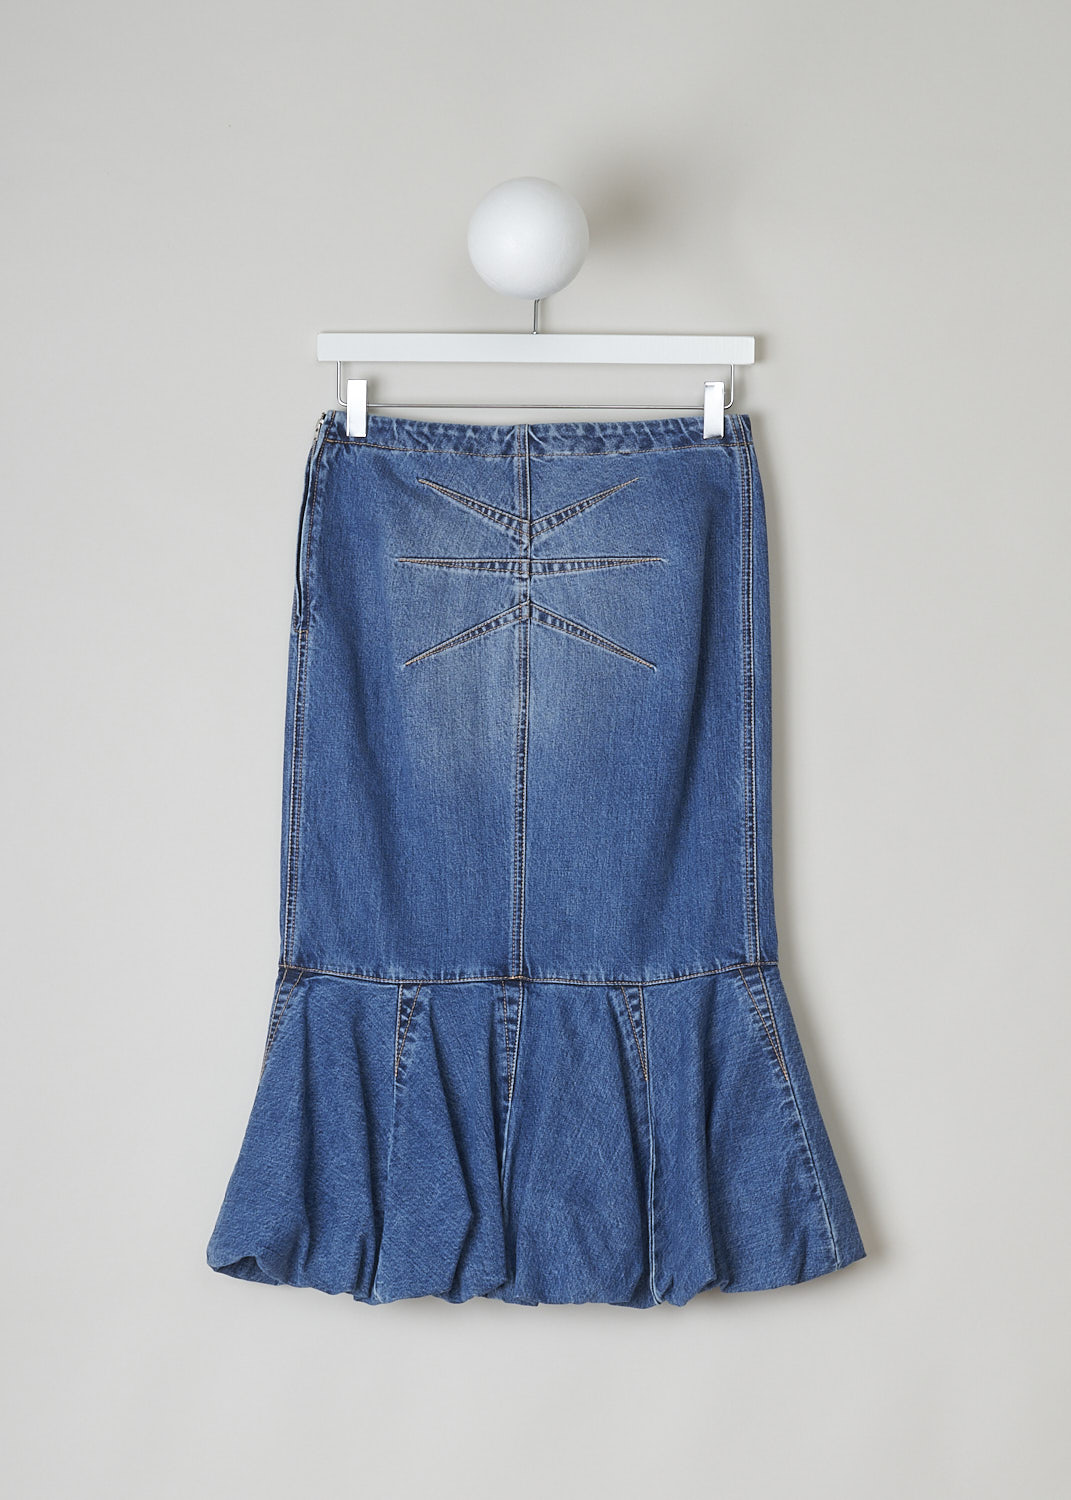 ALAÏA, BLUE DENIM FIT-AND-FLARE SKIRT, AA9J03922T441_BLEU_JEANS, Blue, Back, This blue denim midi skirt has a fit-and-flare silhouette with a broad voluminous trim. A concealed side zip functions as the closure option. In the back, decorative seams can be found. 
